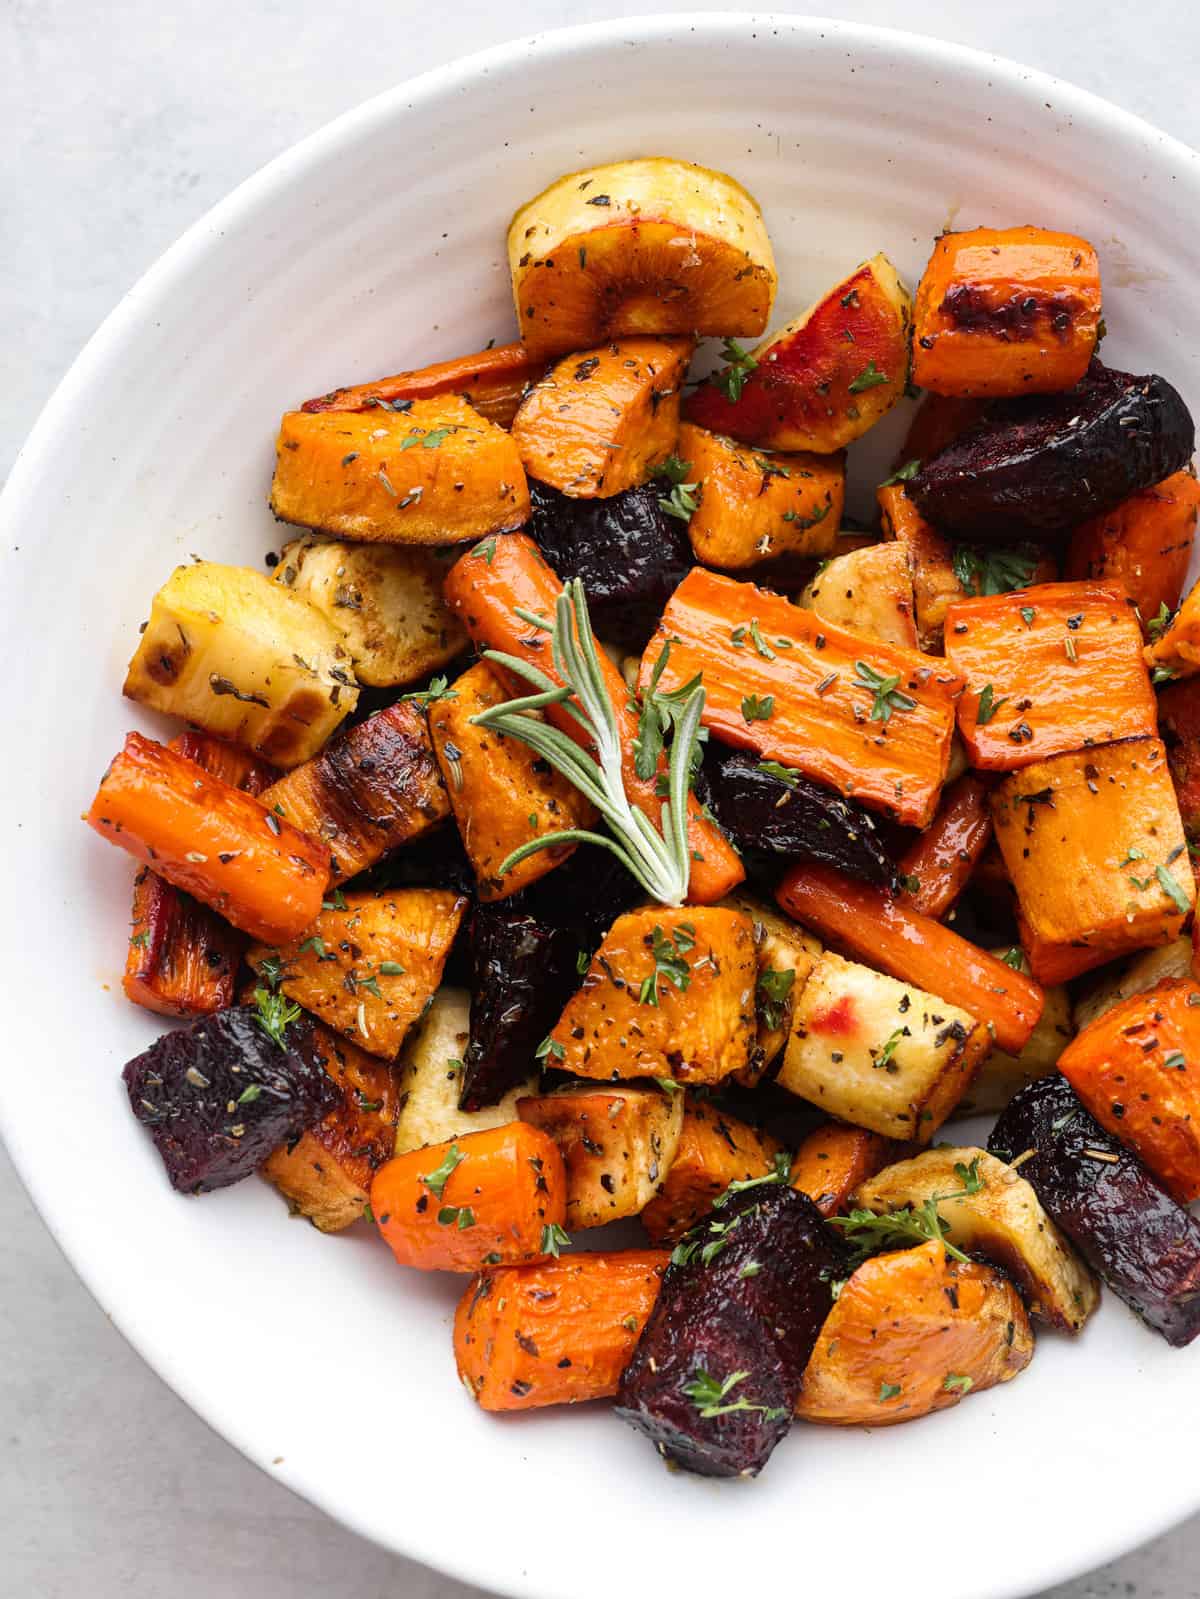 https://therecipecritic.com/wp-content/uploads/2022/07/roasted-root-vegetables-1.jpg